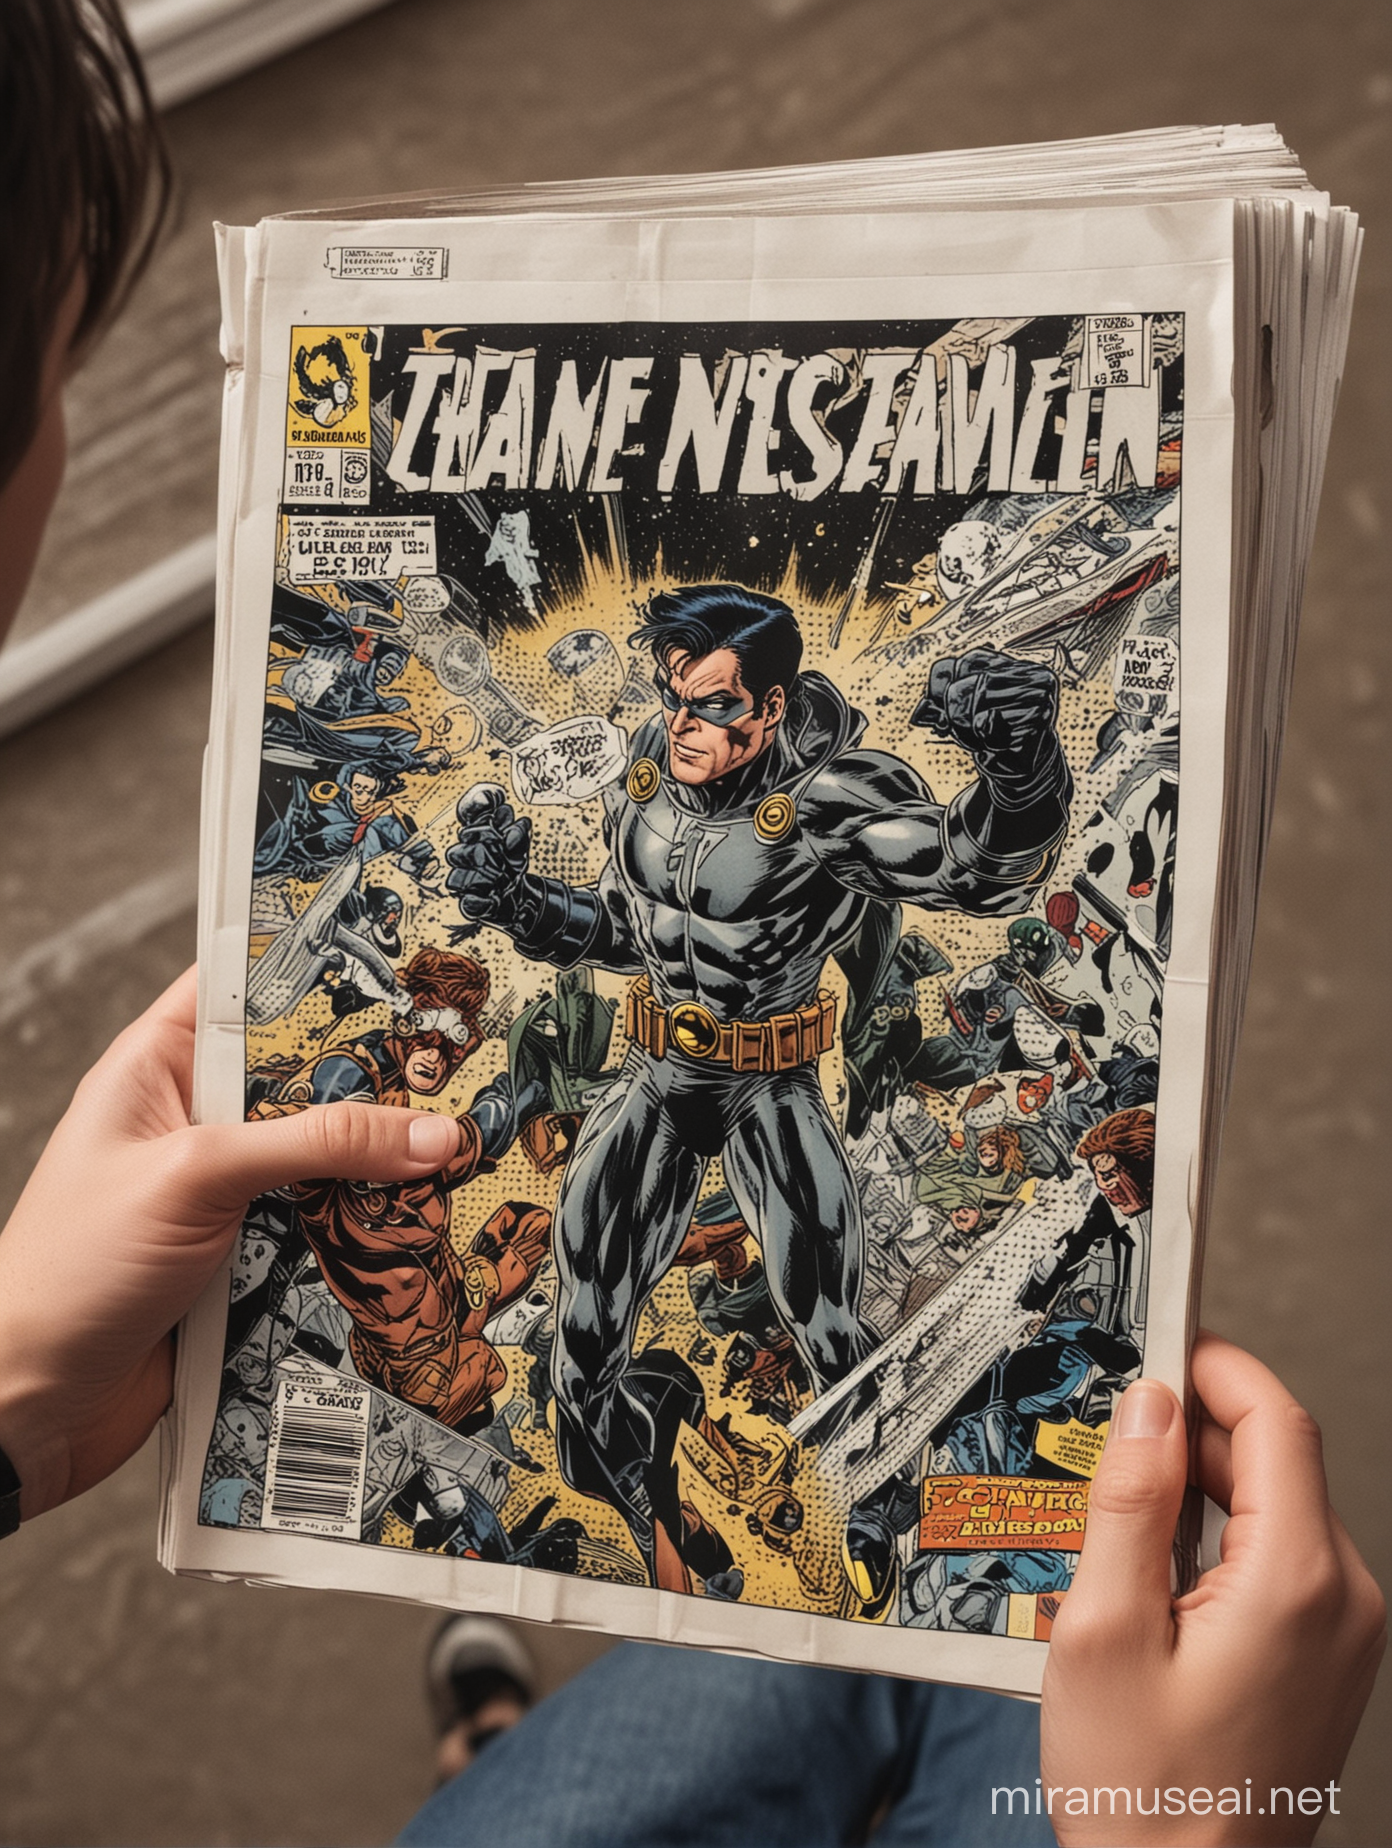 Person Holding Comic Book Looking at Cover